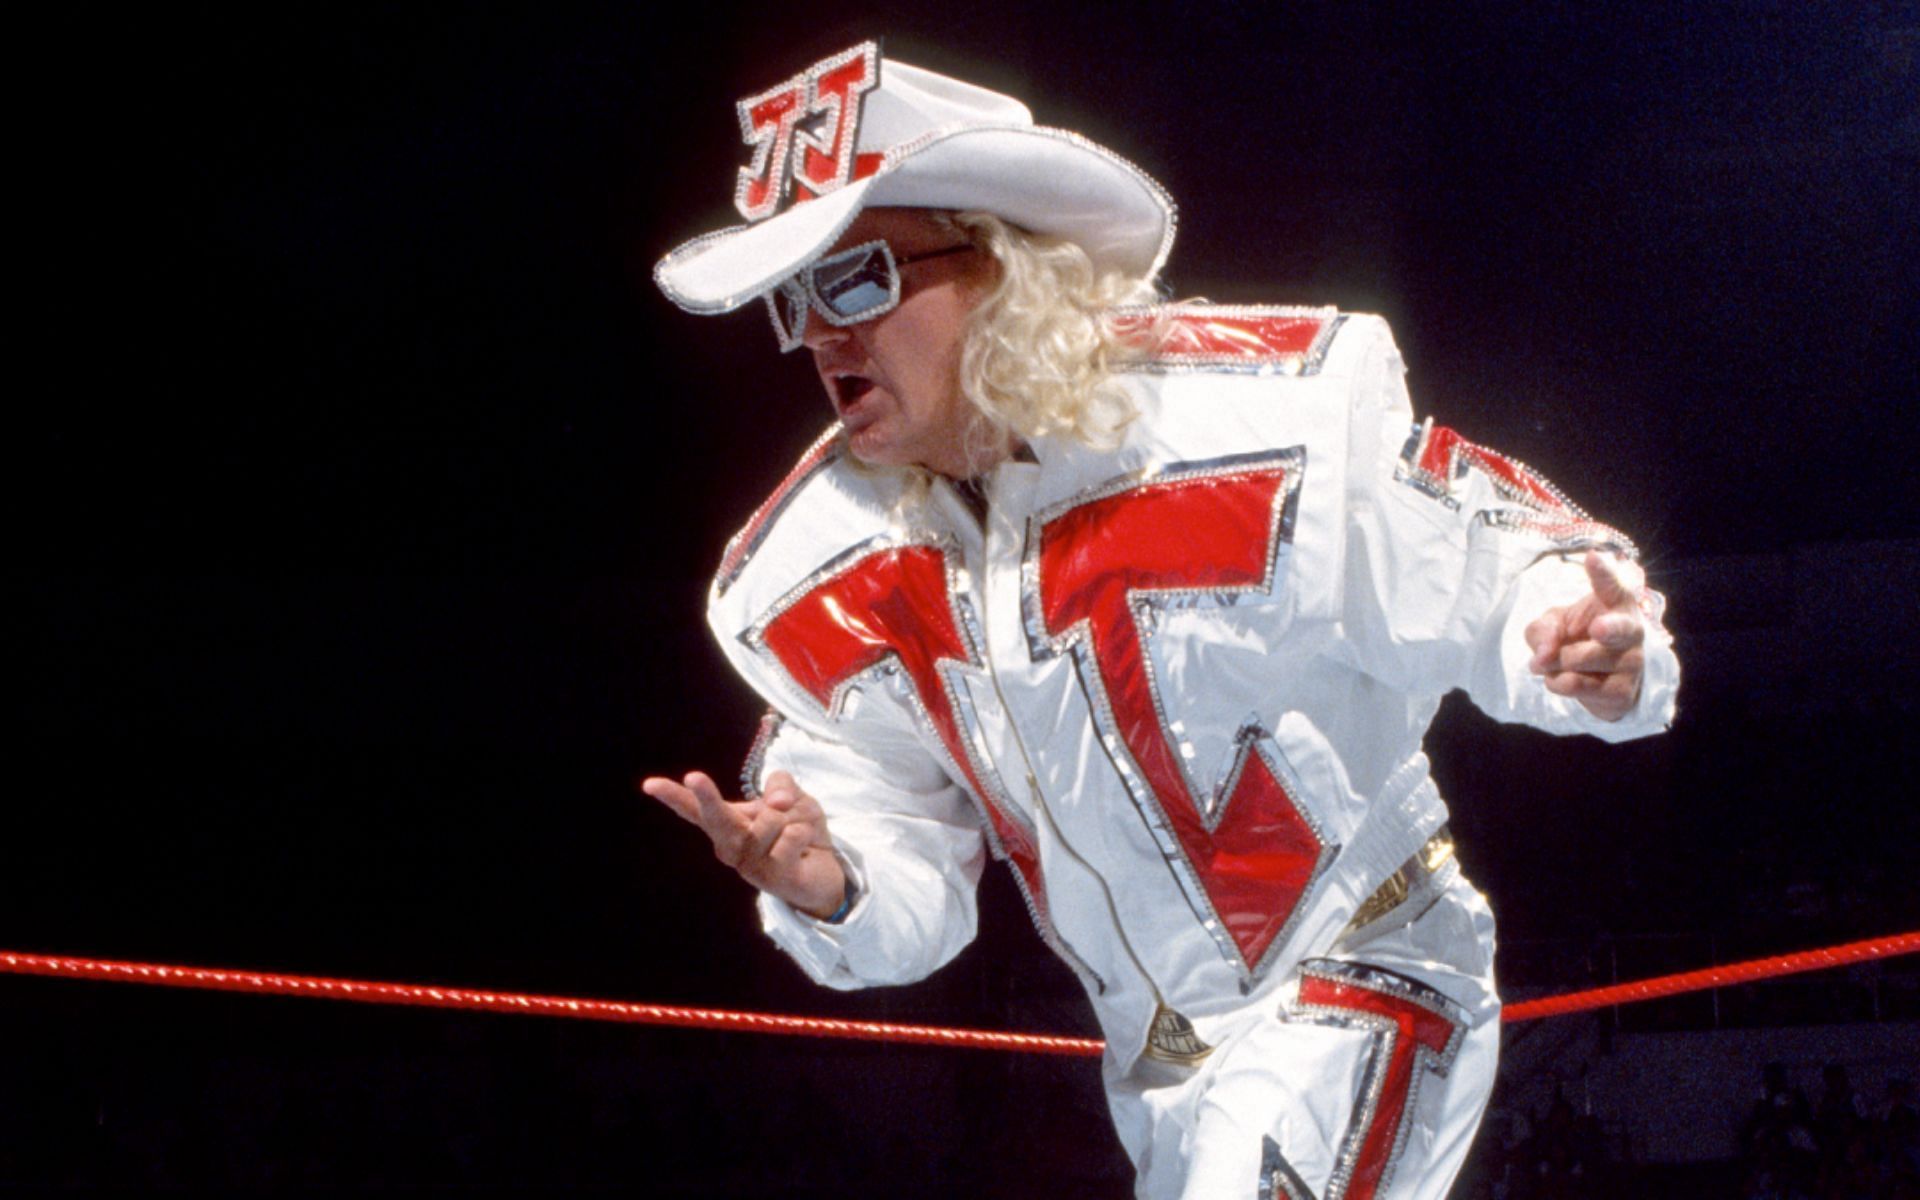 Jeff Jarrett competed in WCW and WWF/E